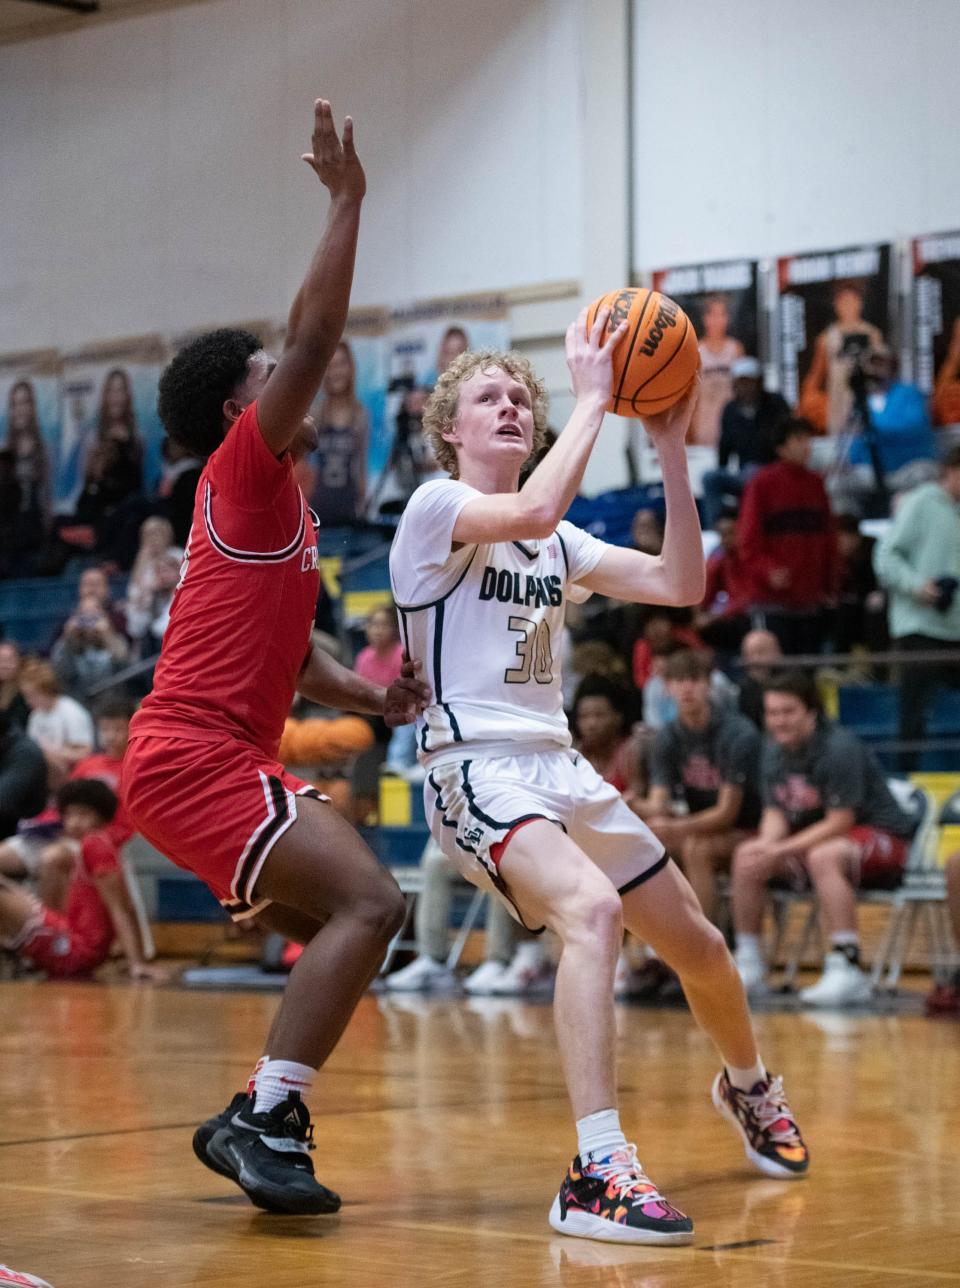 Hutson Rowe (30) looks to shoot during the Crestview vs Gulf Breeze boys basketball game at Gulf Breeze High School on Tuesday, Dec. 20, 2022.